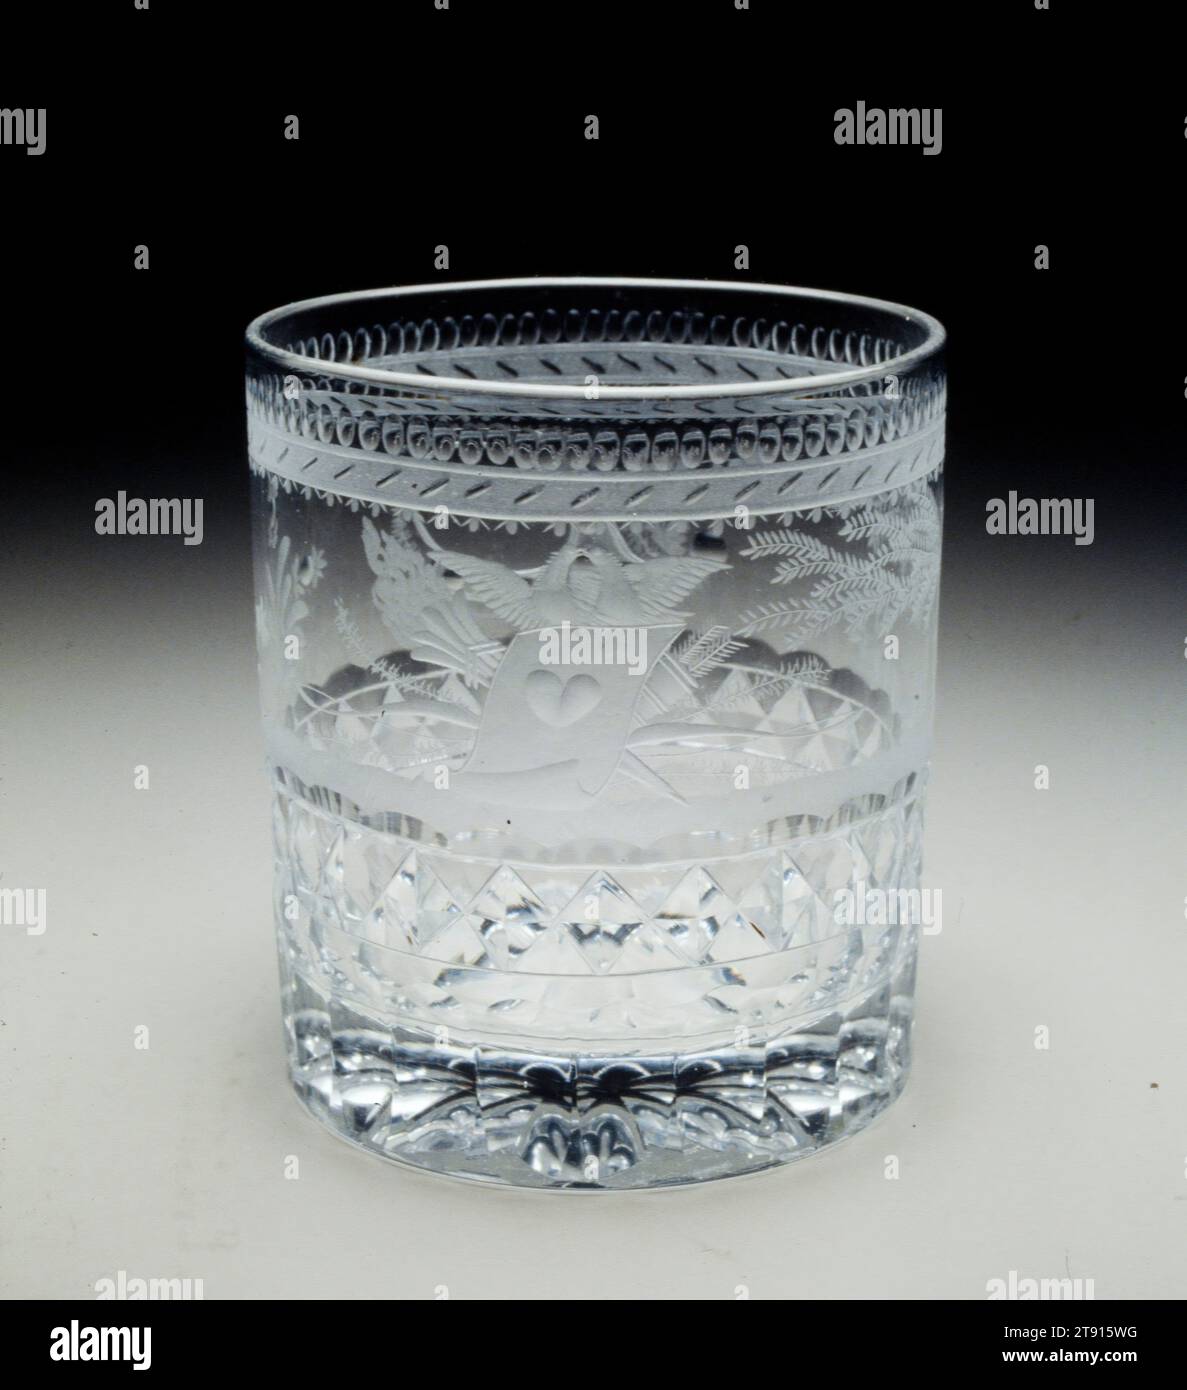 Friendship tumbler, c. 1825, Attributed to Bakewell, Page and Bakewell, Pittsburgh, Pennsylvania, 1808-1882, 3 3/8 x 3 1/8 in. (8.6 x 7.94 cm), Cut, etched and engraved glass, United States, 19th Century, The Bakewell firm in Pittsburgh is famous for introducing high quality table glass to America. They are also known for encasing glass with sulphide medallions of important Americans, such as Benjamin Franklin and George Washington, similar to the sulphide of the kneeling slave seen on the English cologne bottle nearby. The neoclassical motifs on this tumbler show Bakewell's supurb cutting Stock Photo